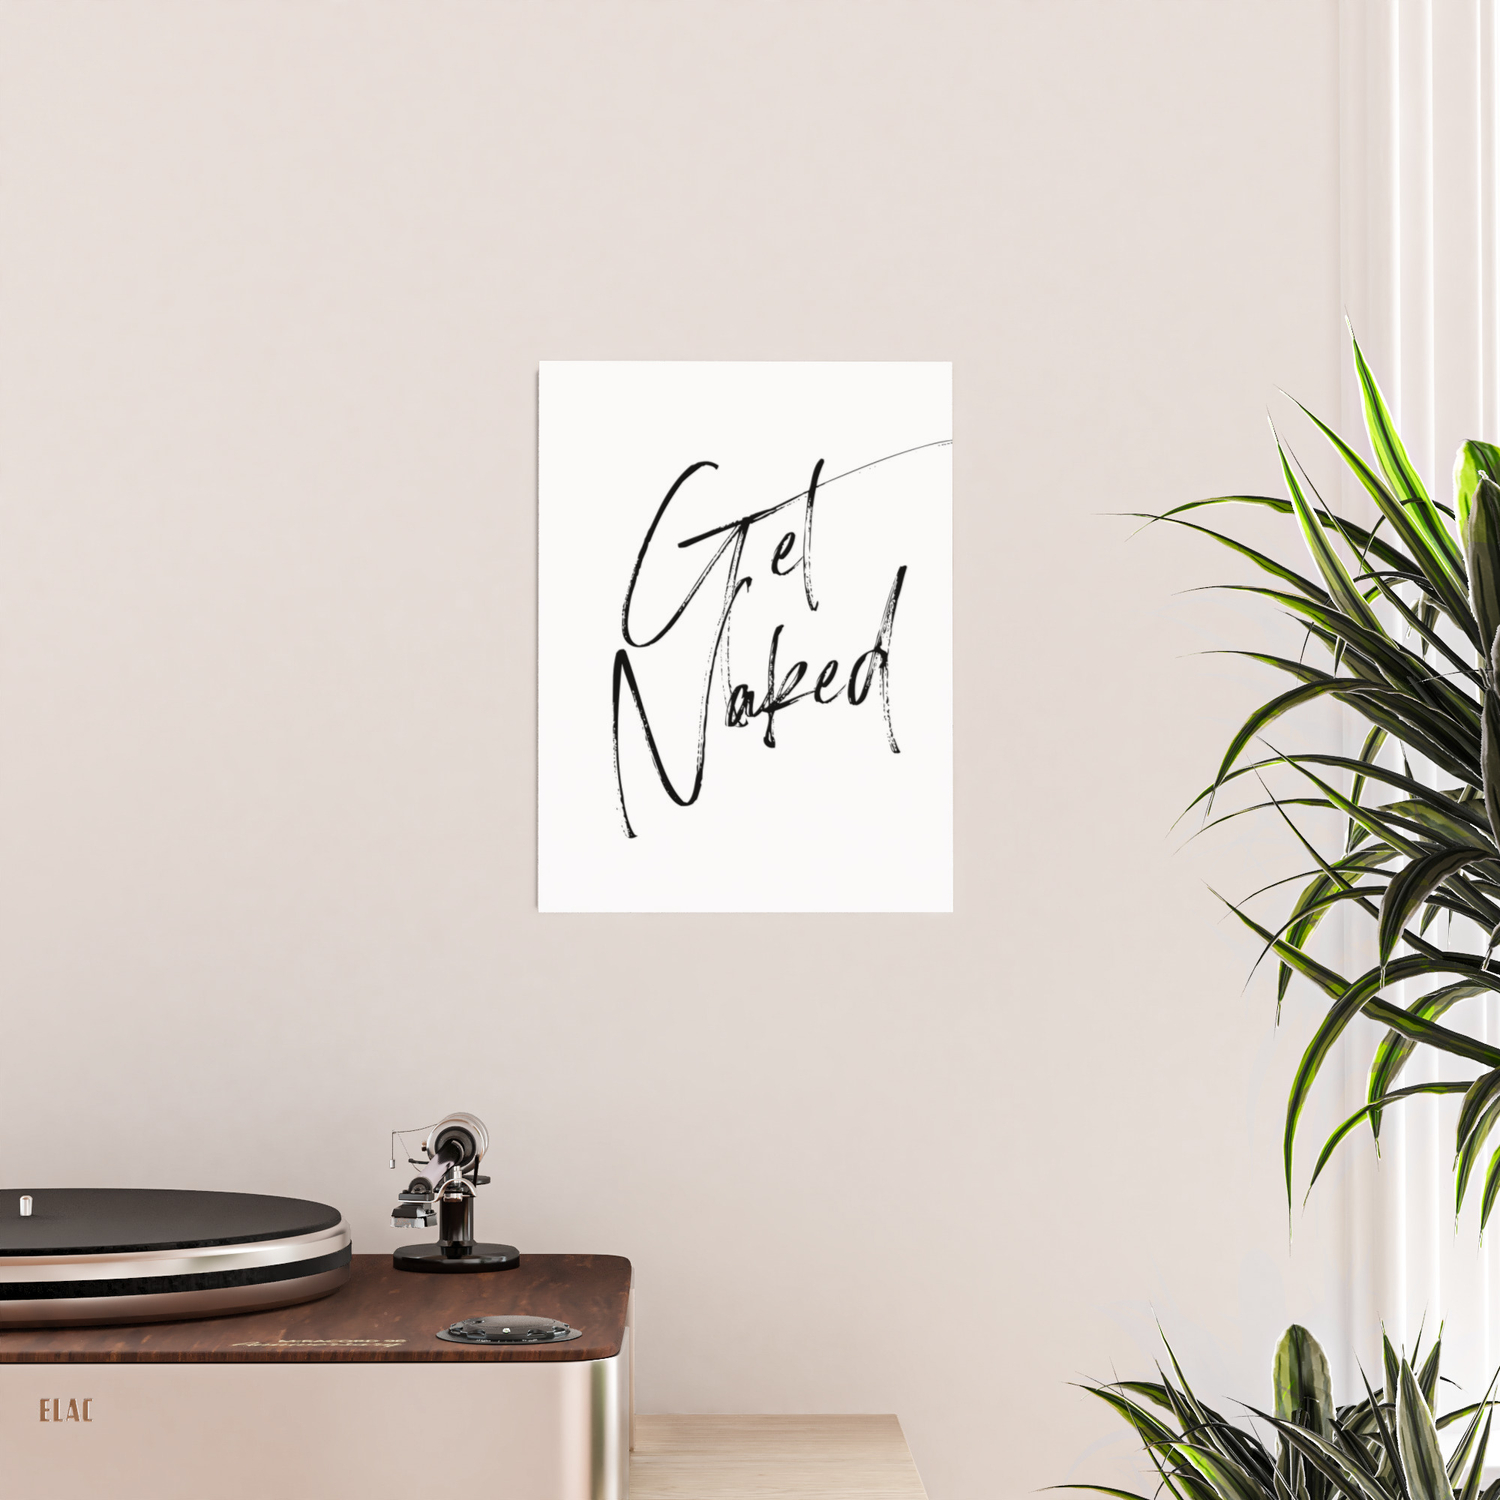 Bathroom Home Decor A4 /& A3 Minimalist Print Get Naked Printed Typography Poster